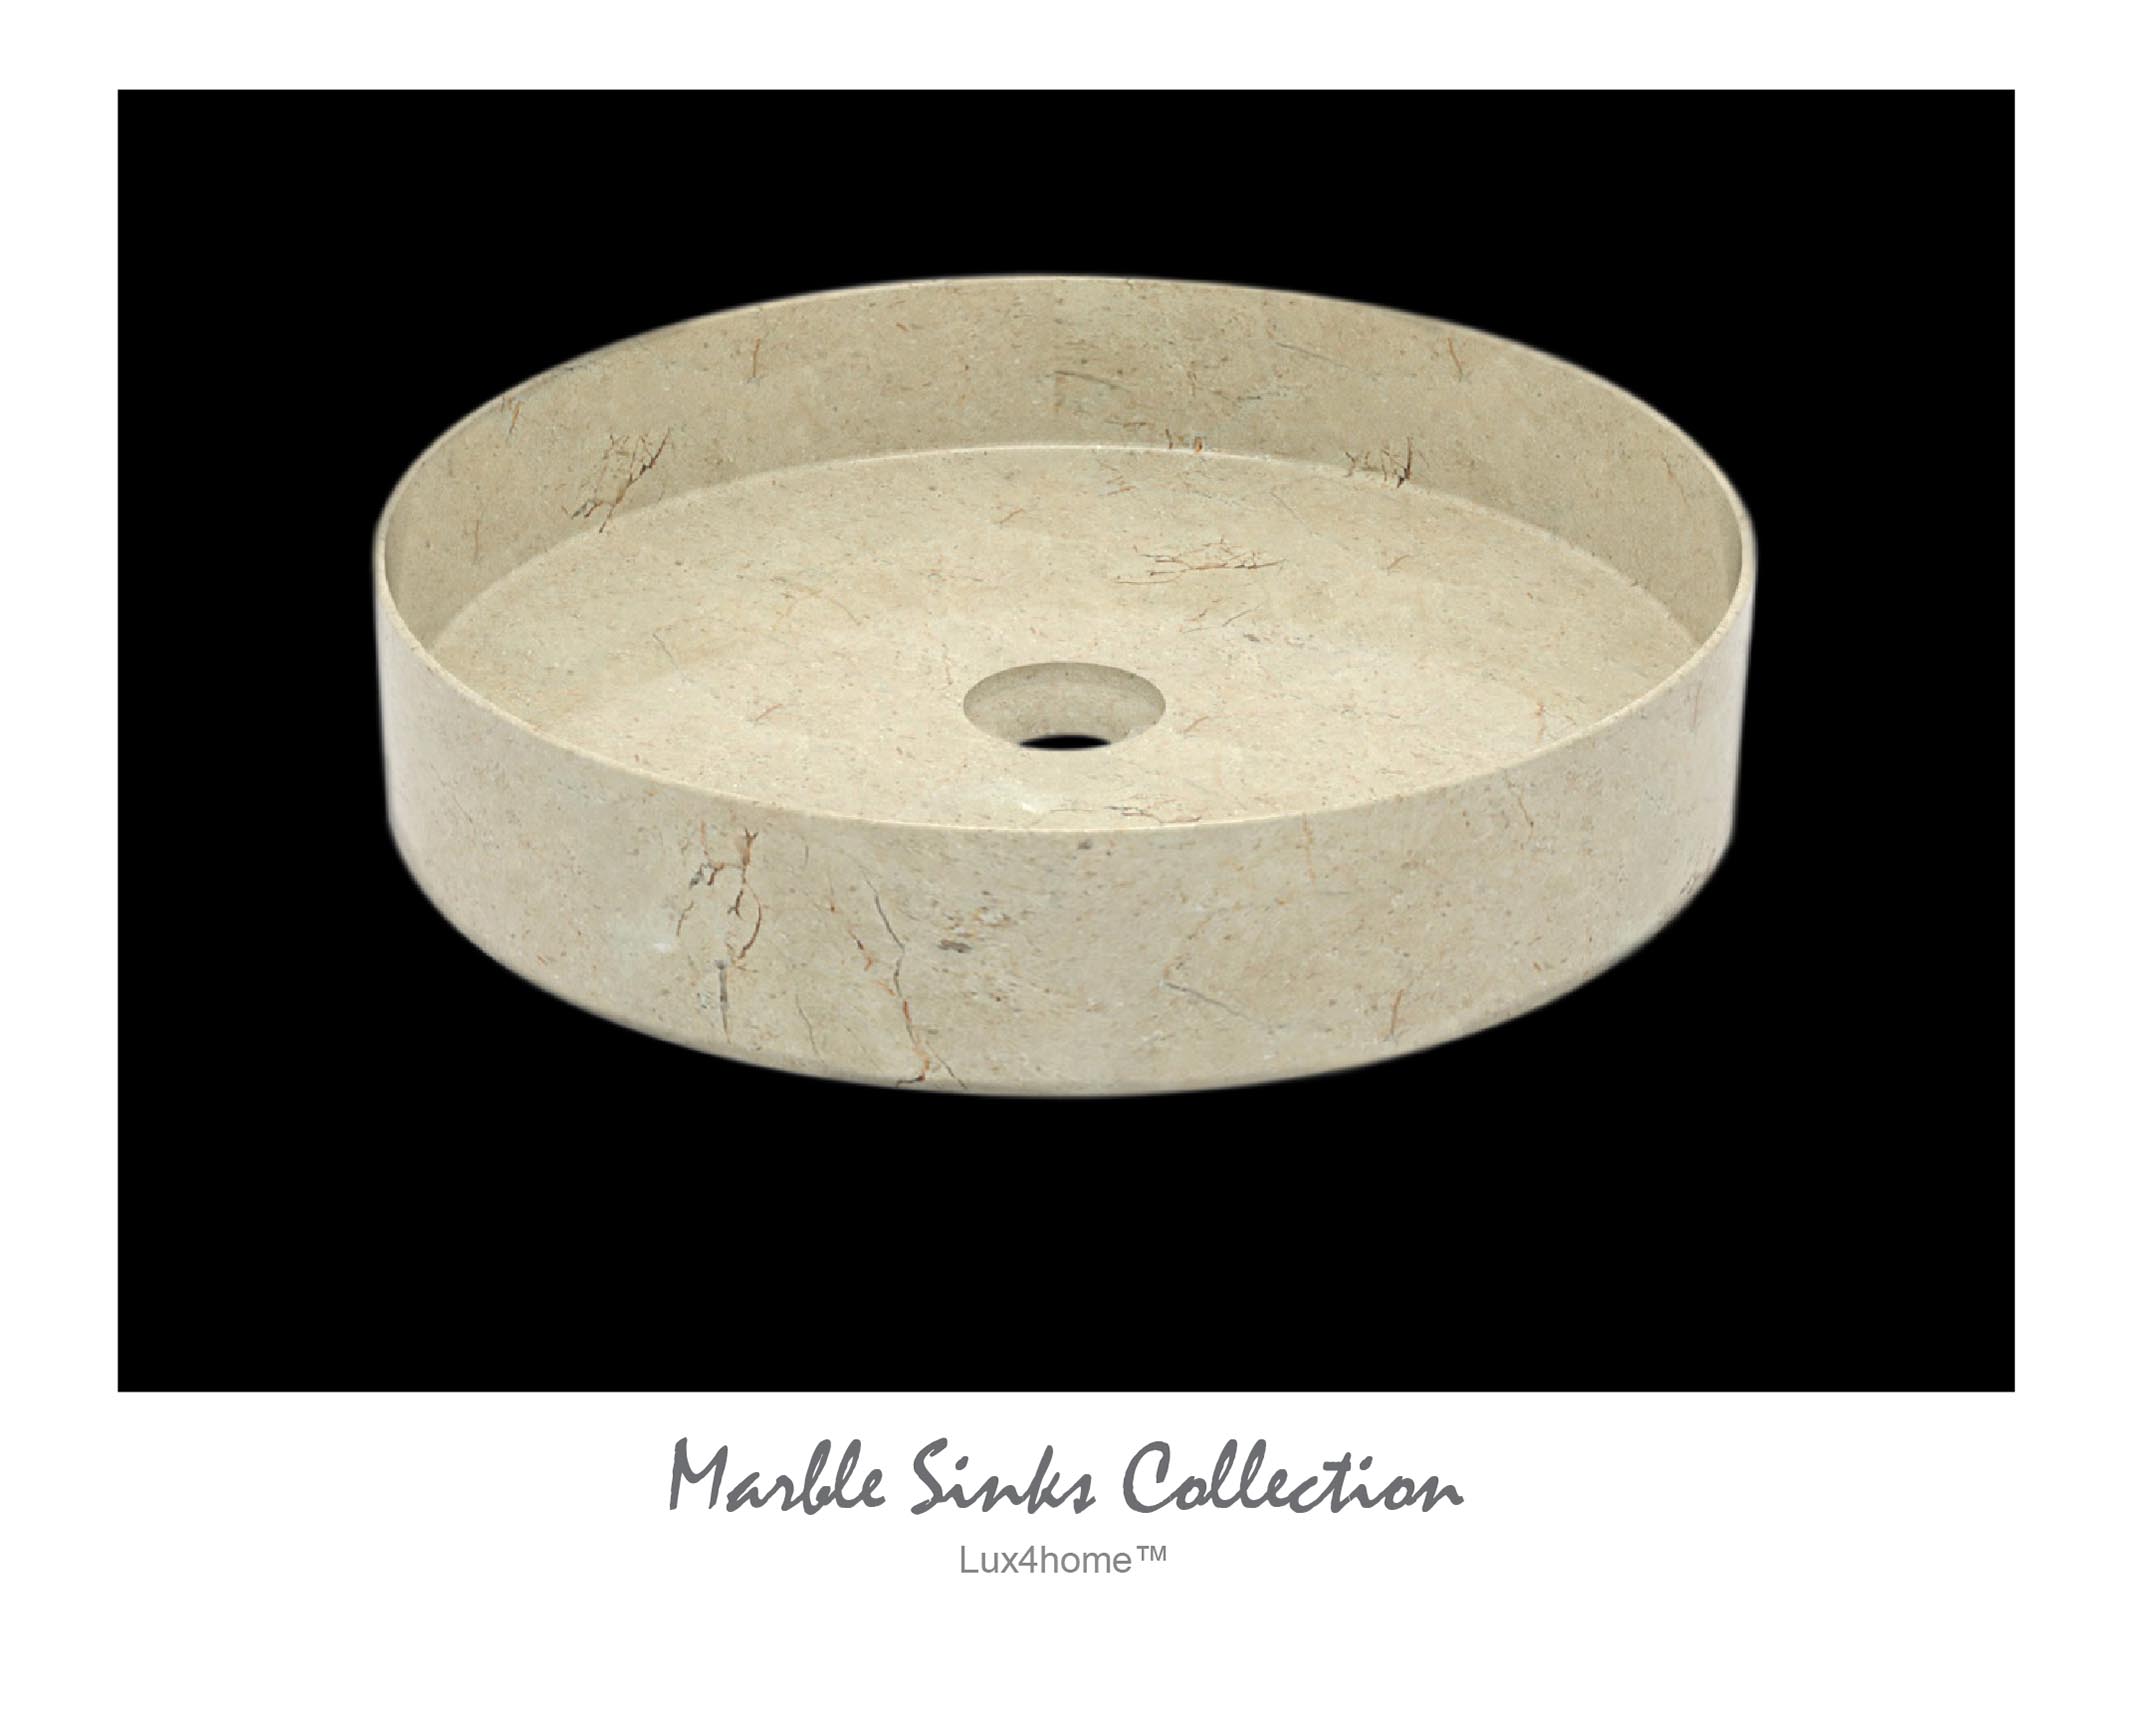 Marble Sinks Producer